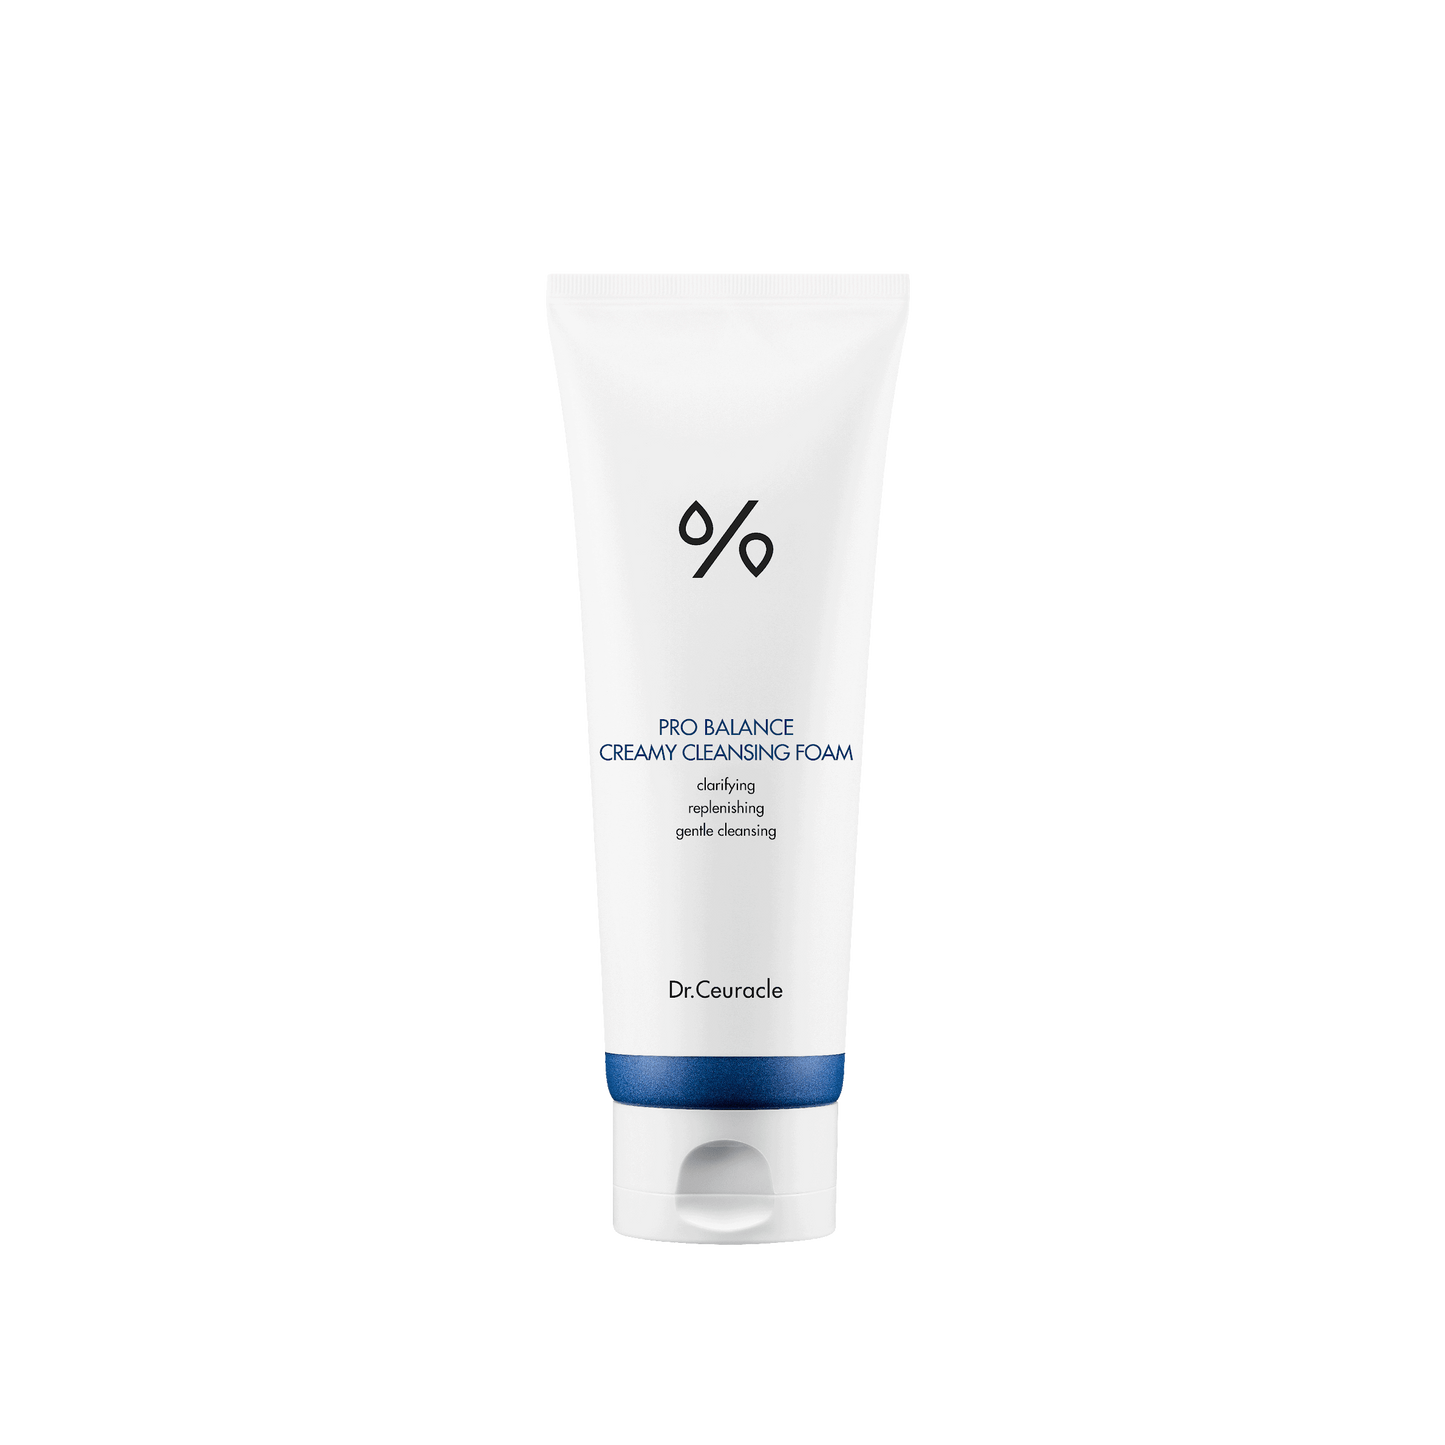 [Dr.Ceuracle] Pro Balance Creamy Cleansing Foam 150g